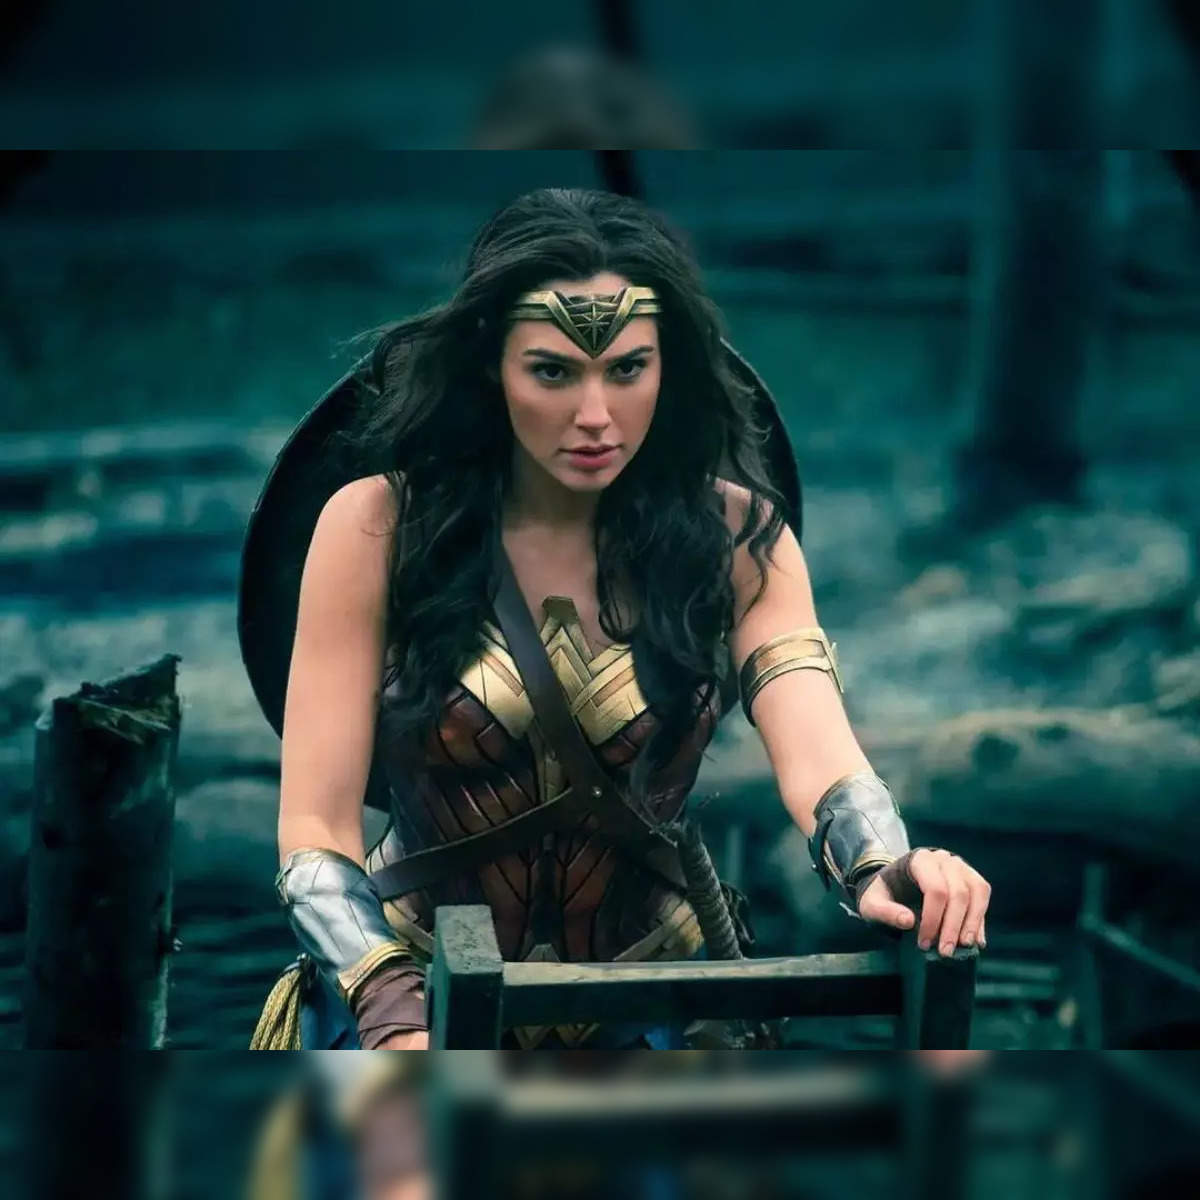 Is Gal Gadot's Wonder Woman in Shazam! Fury Of The Gods?